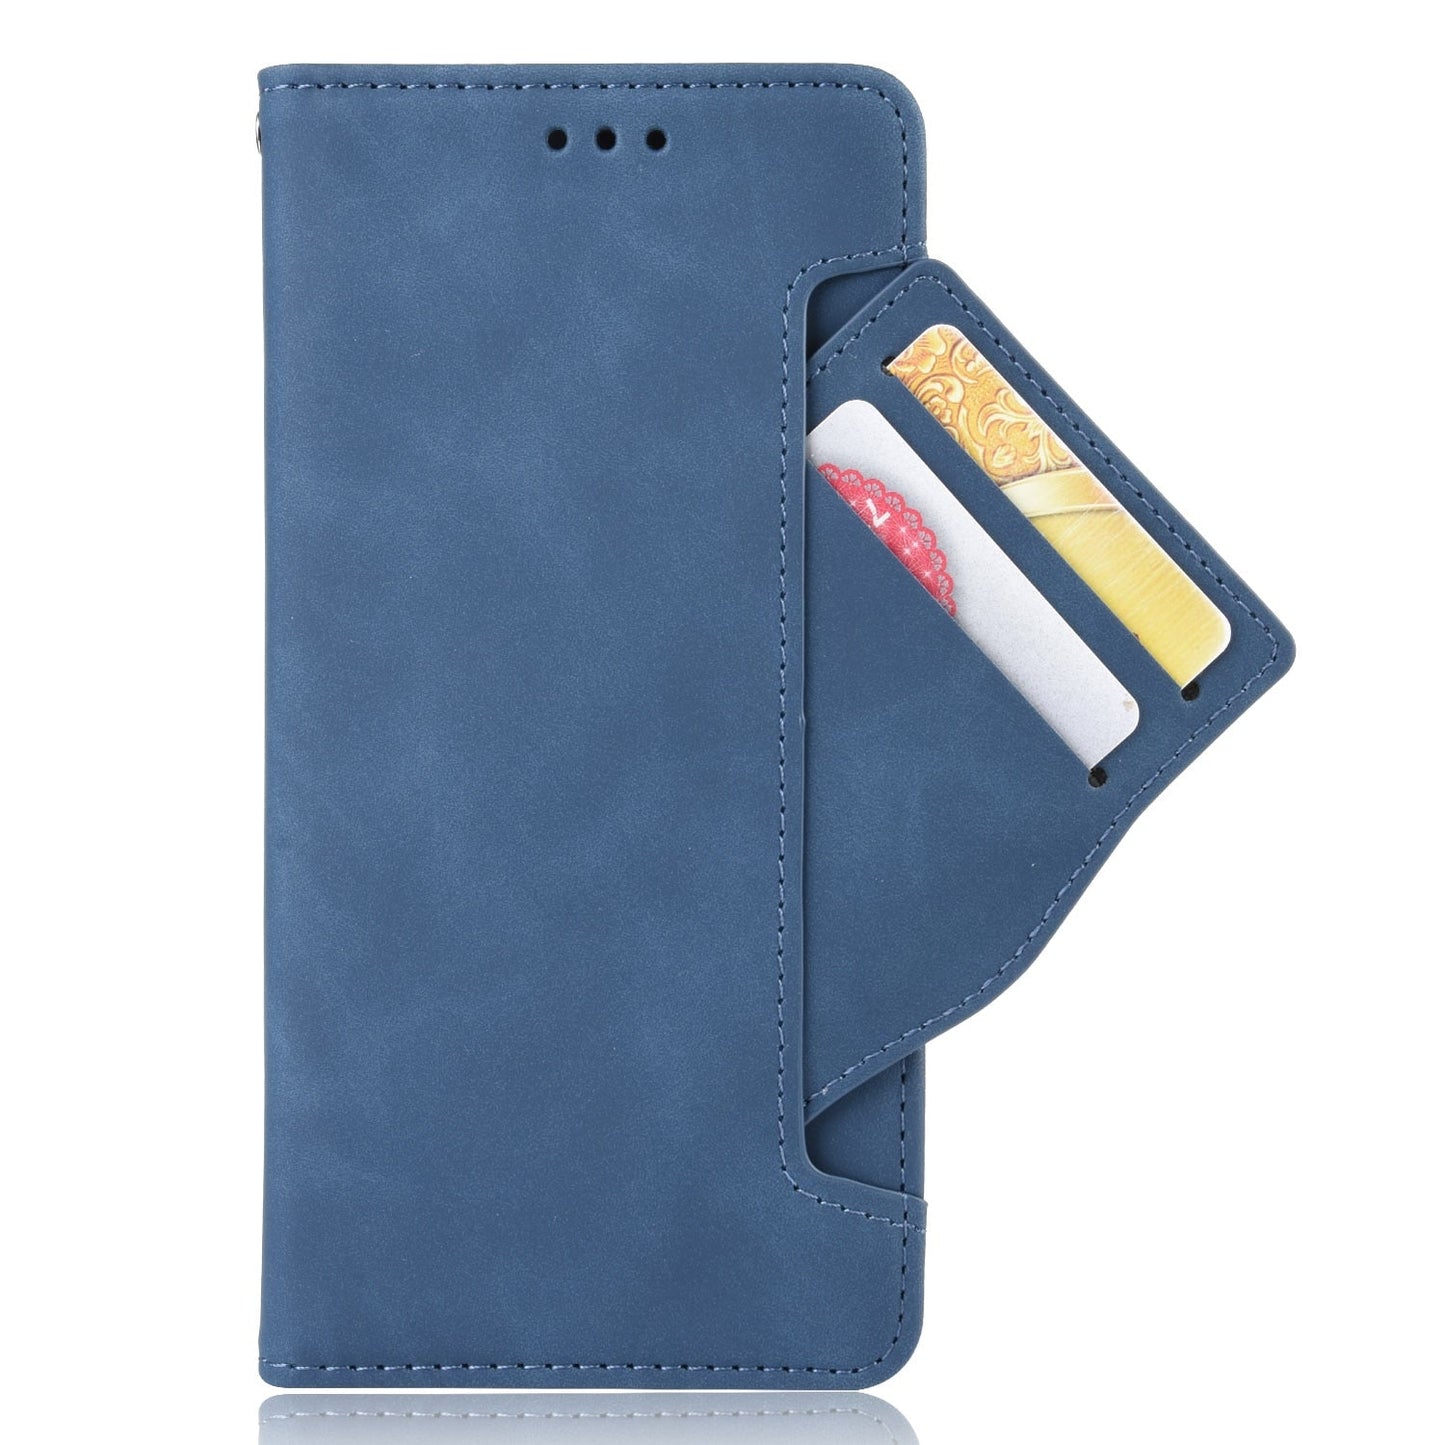 Leather Texture Wallet Case With Pen / Card Slot